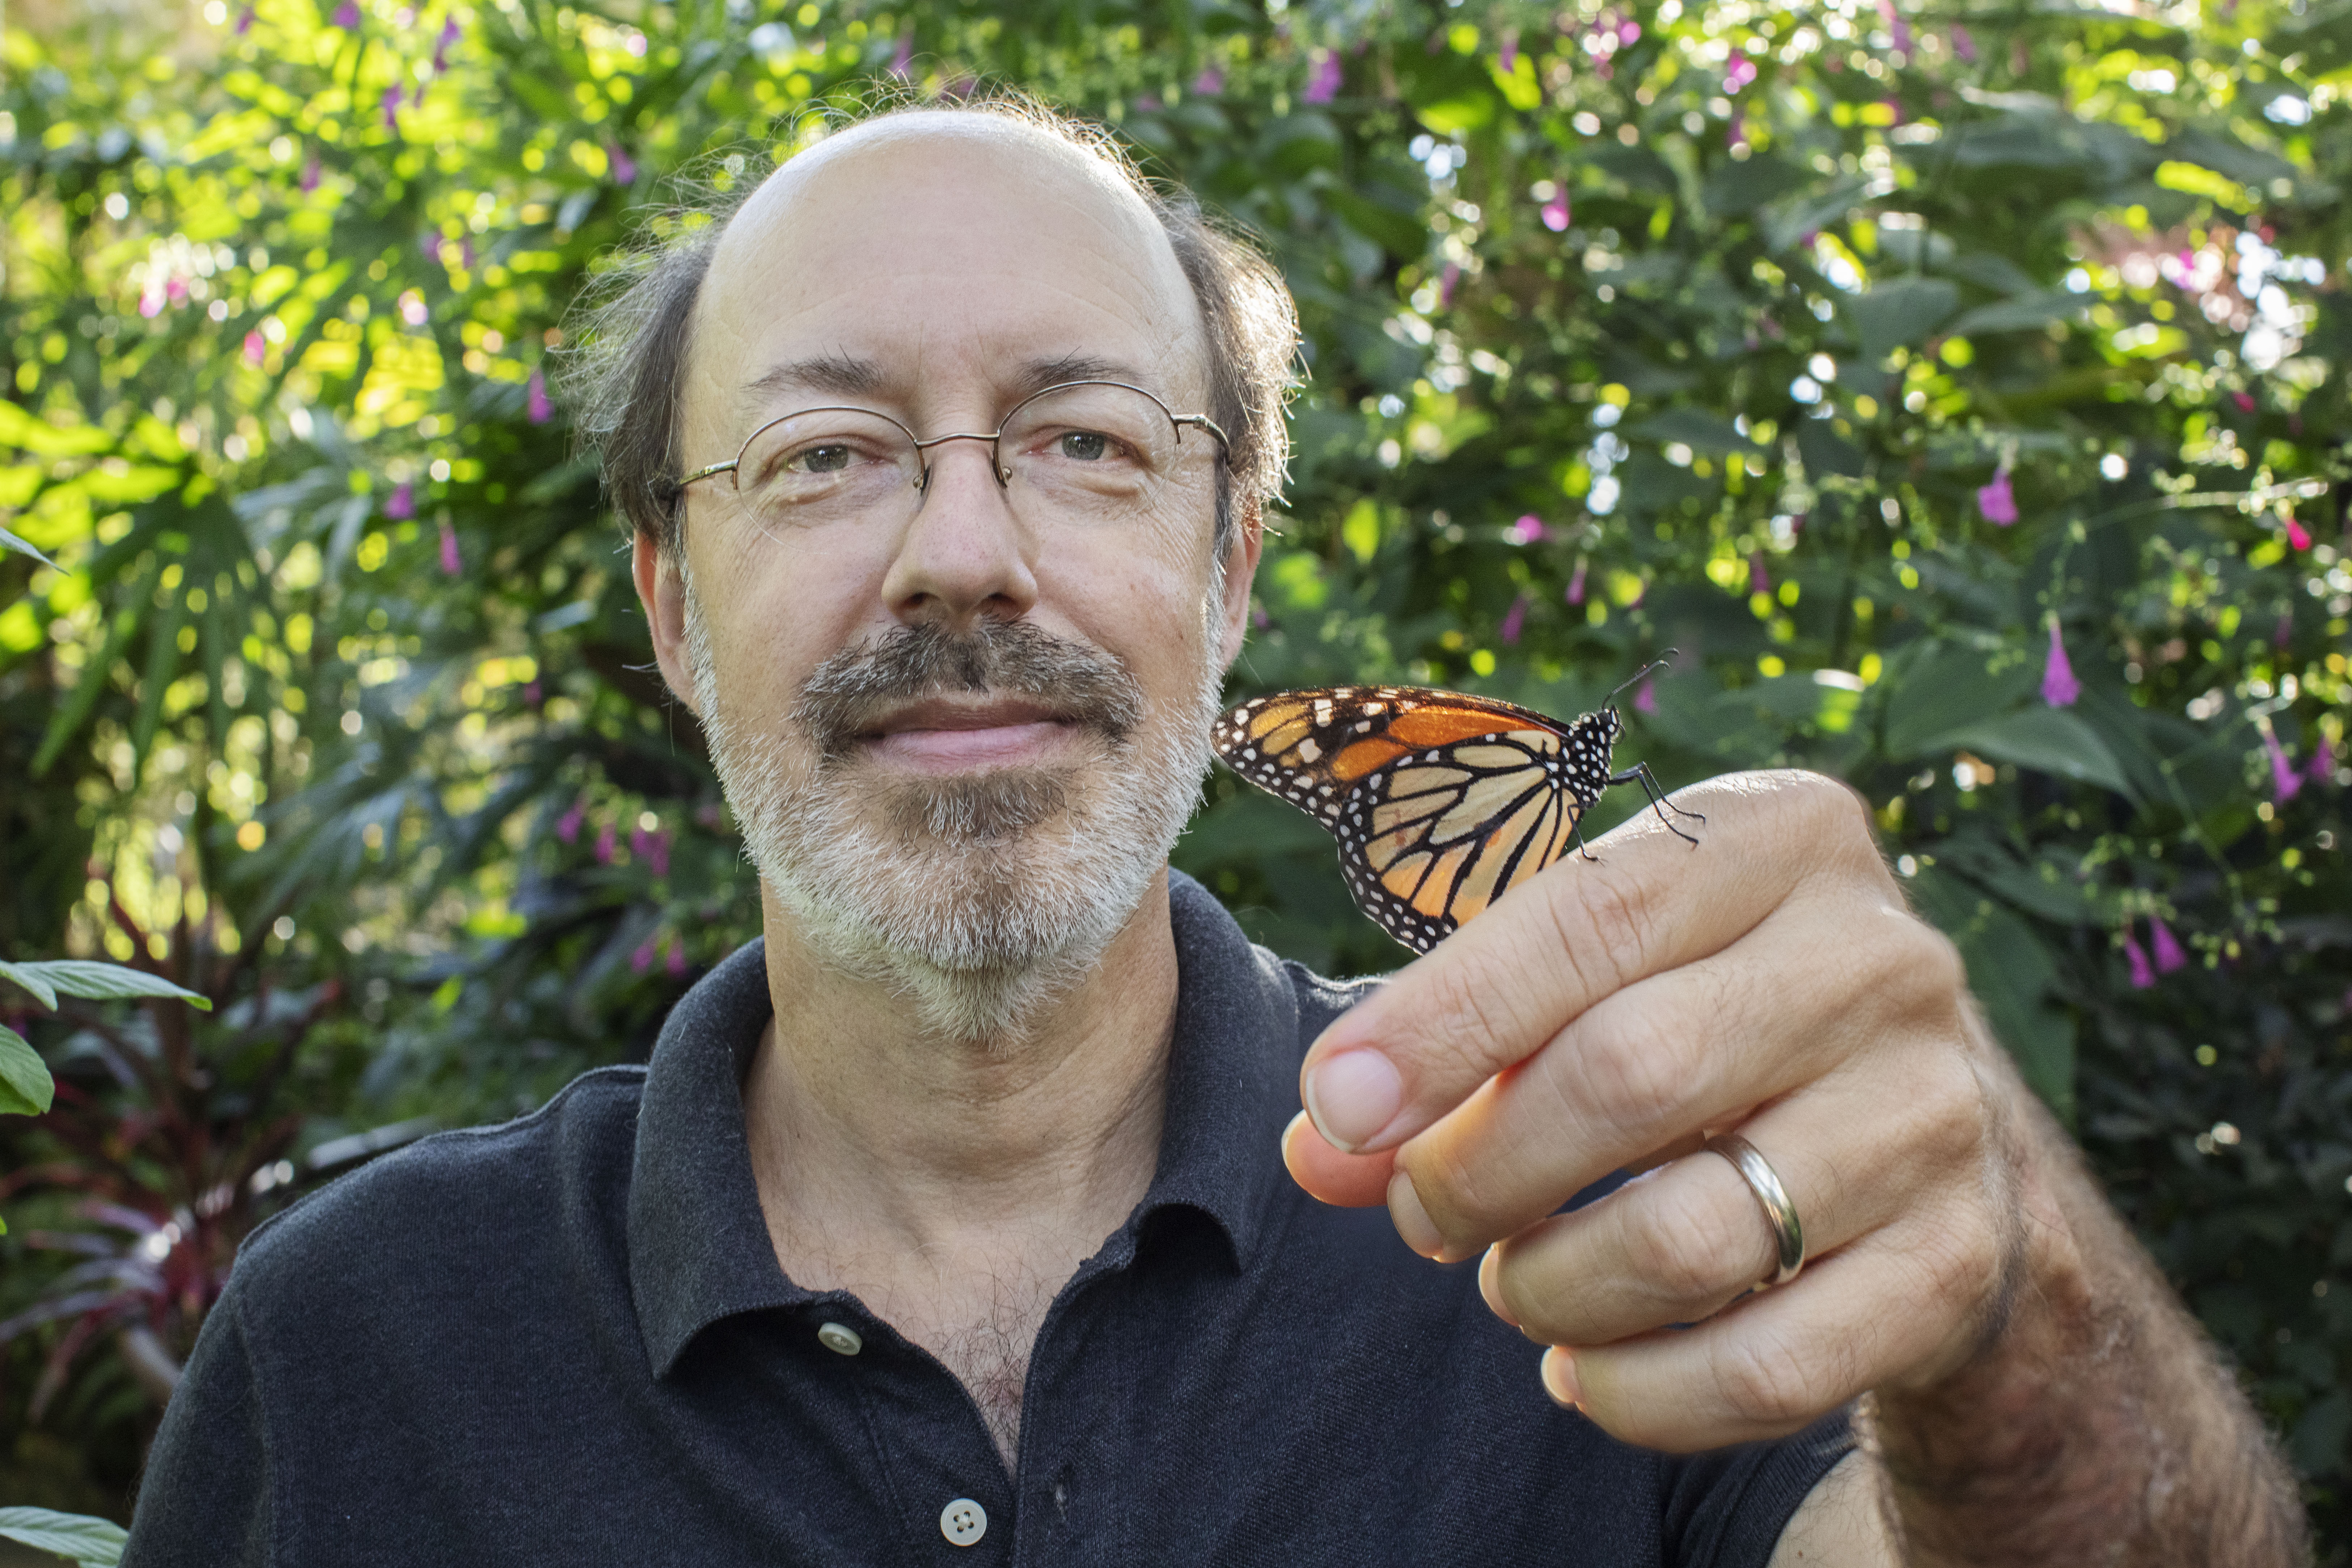 An image of a man wearing glasses and holding a butterfly.